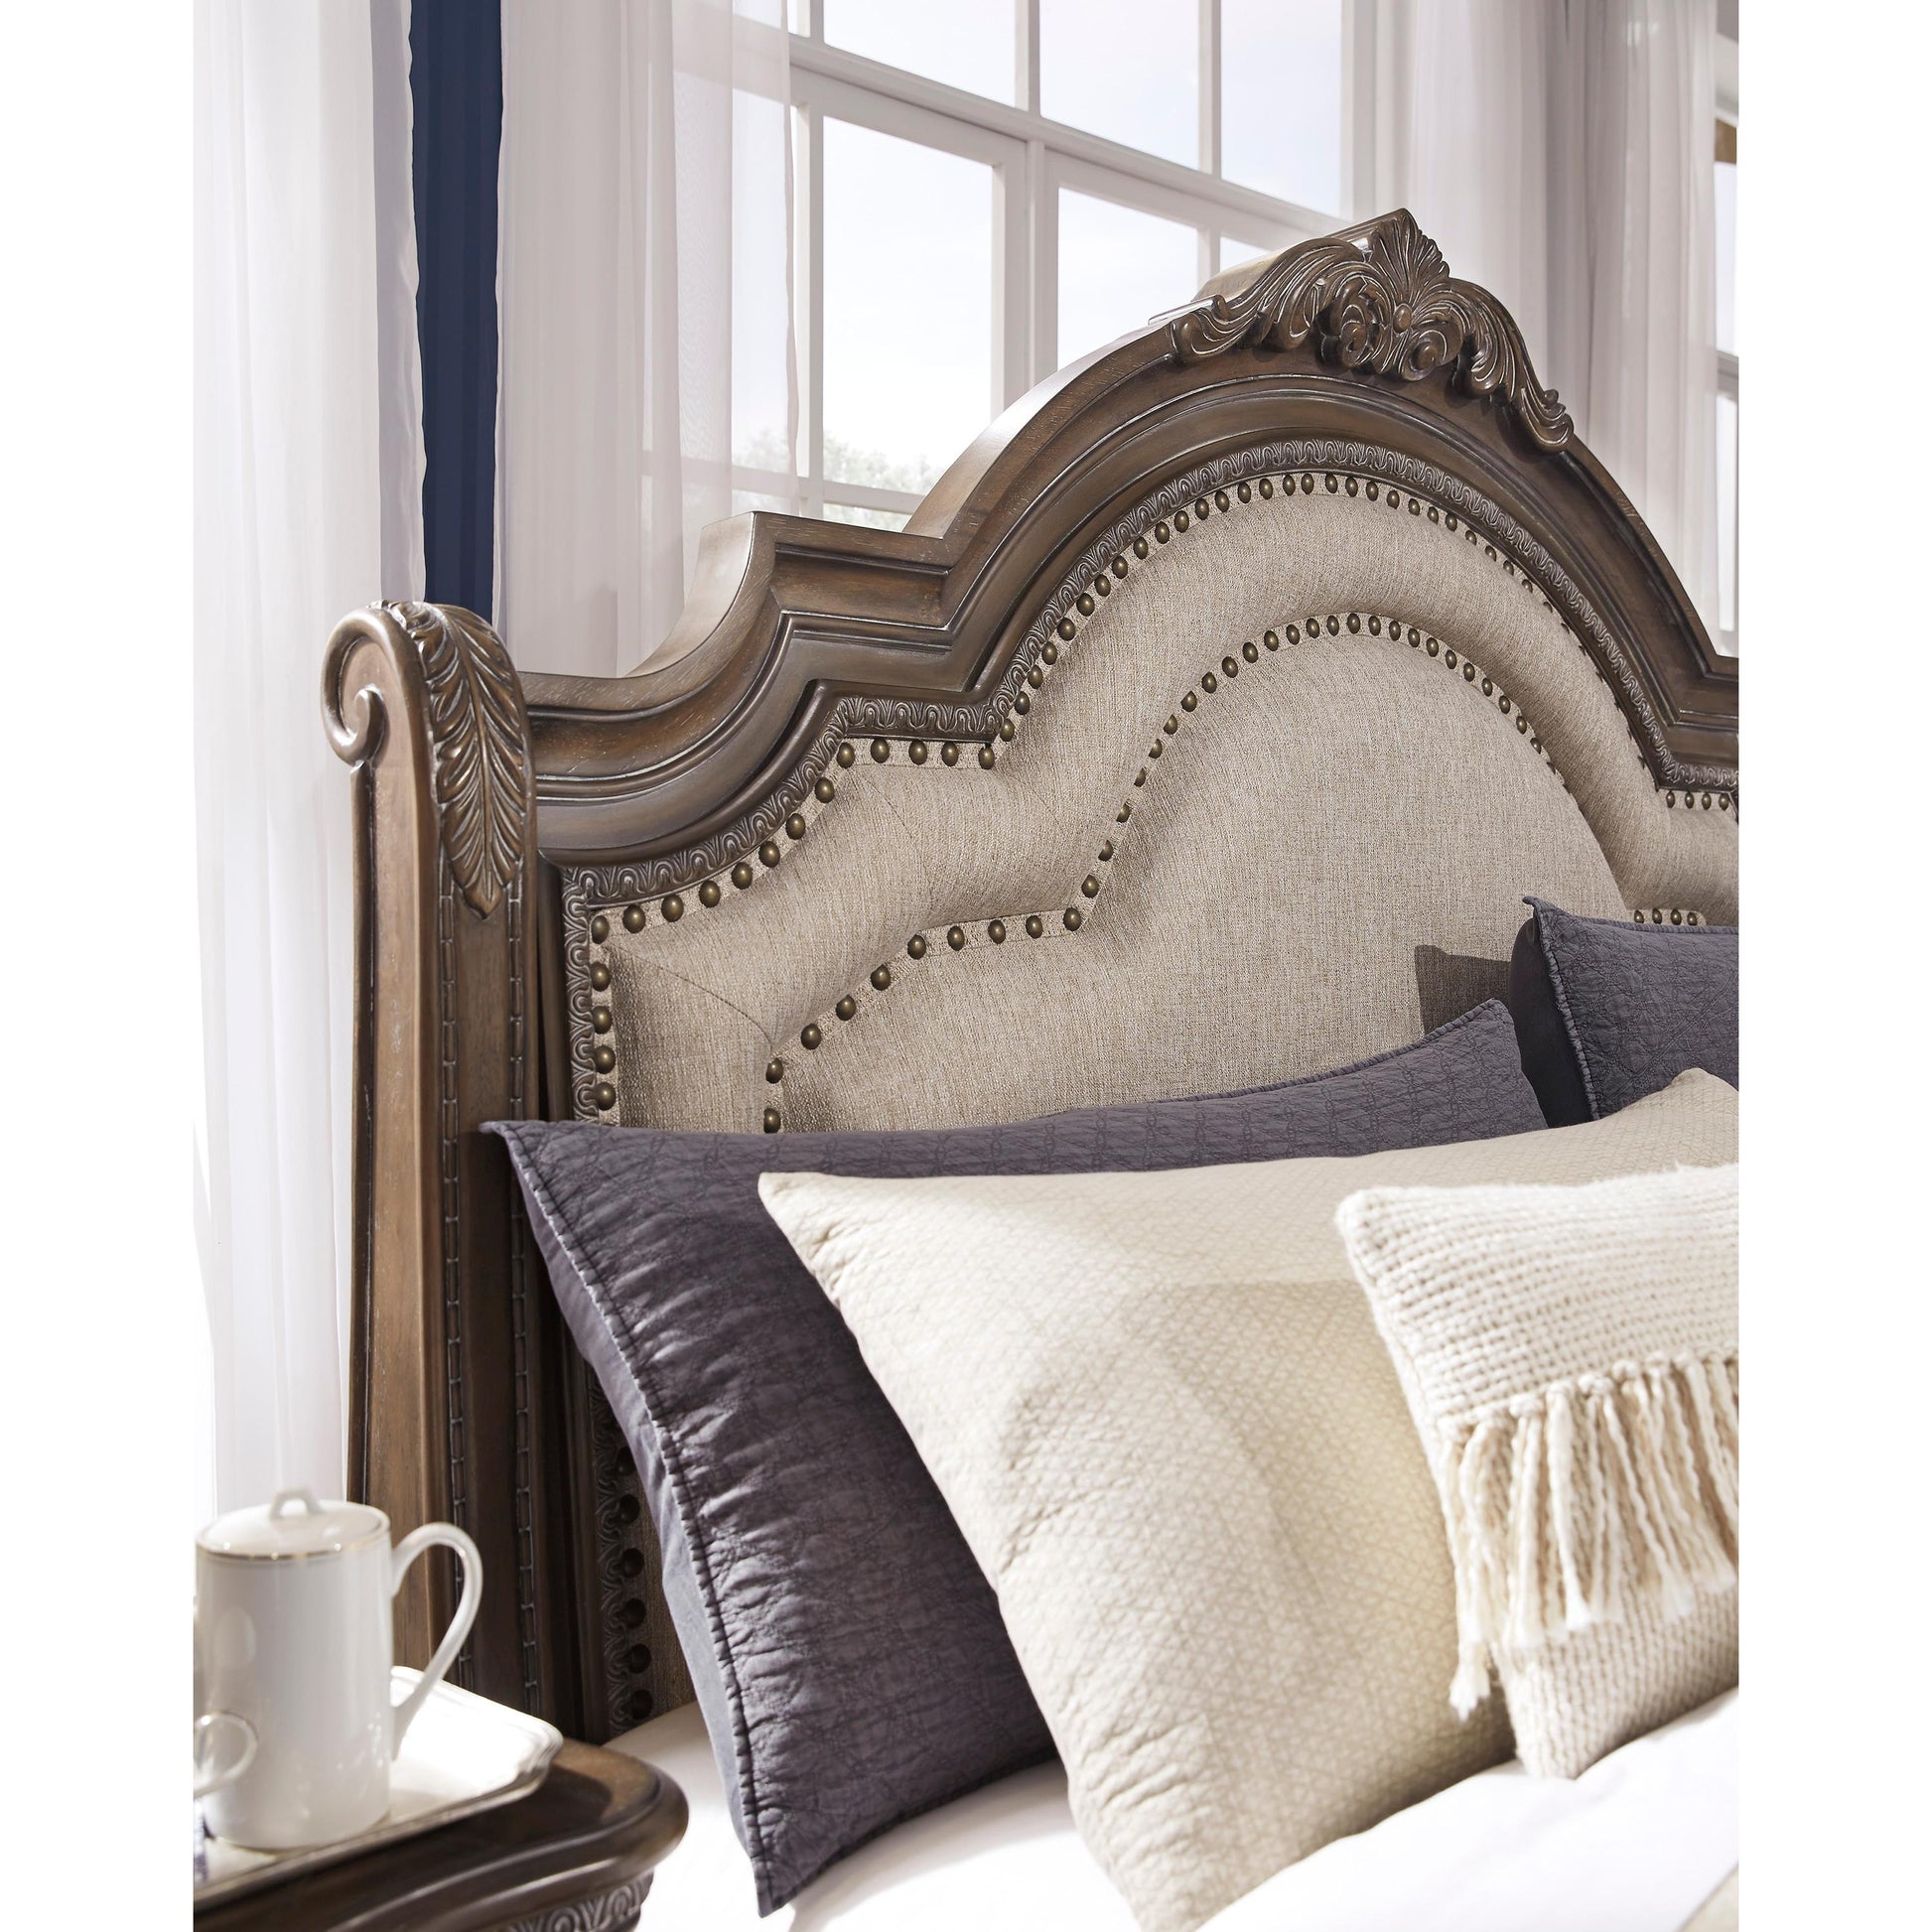 Signature Design by Ashley Charmond King Upholstered Sleigh Bed B803-58/B803-56/B803-97